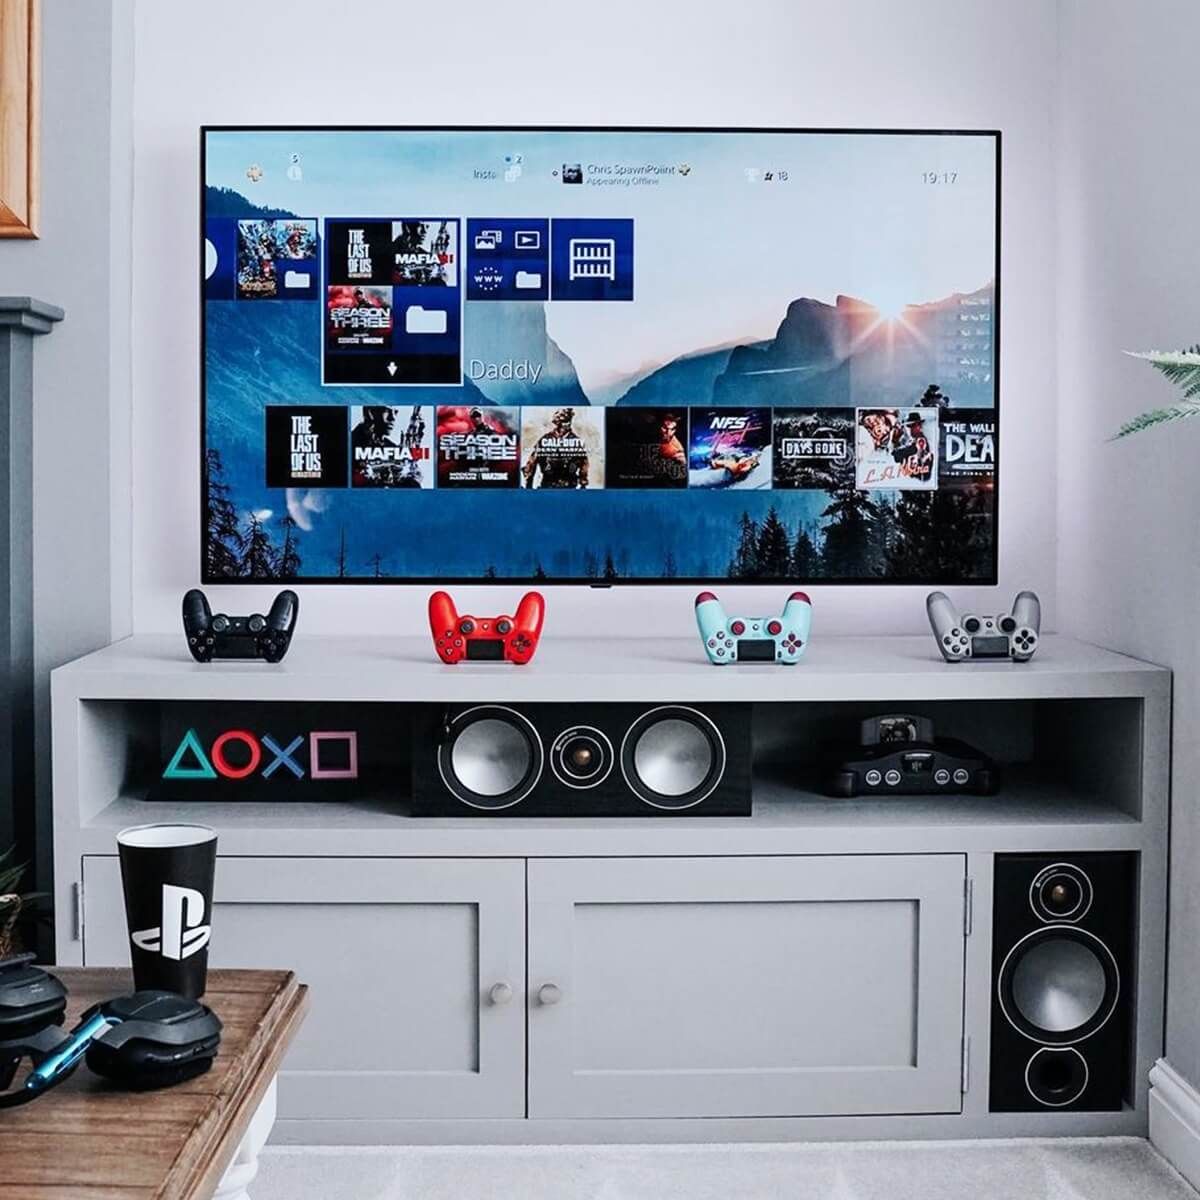 Best Gaming Entertainment Centers & Tv Stand Setup Ideas | Gridfiti Inside Rgb Tv Entertainment Centers (View 18 of 20)